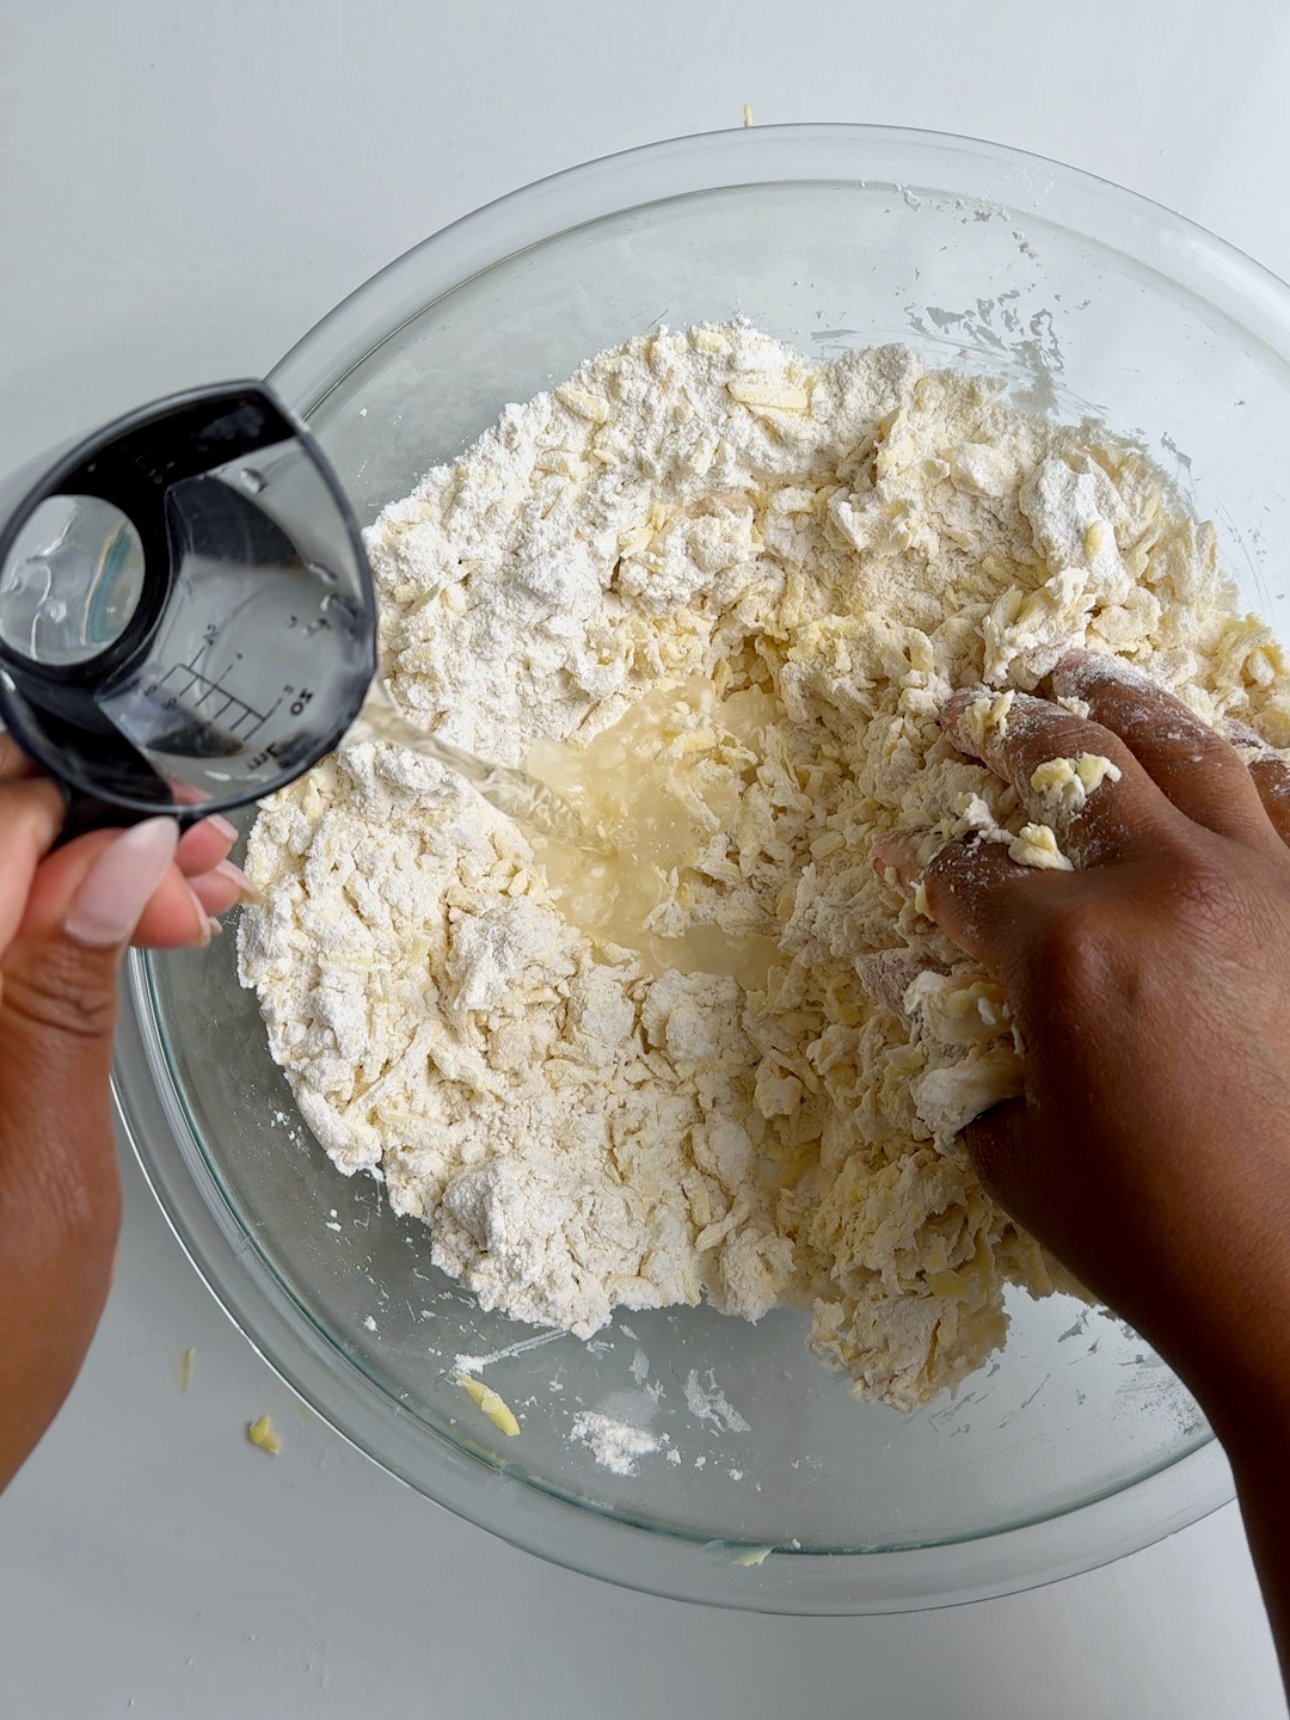 Pouring ice cold water into butter and flour to make pastry dough.